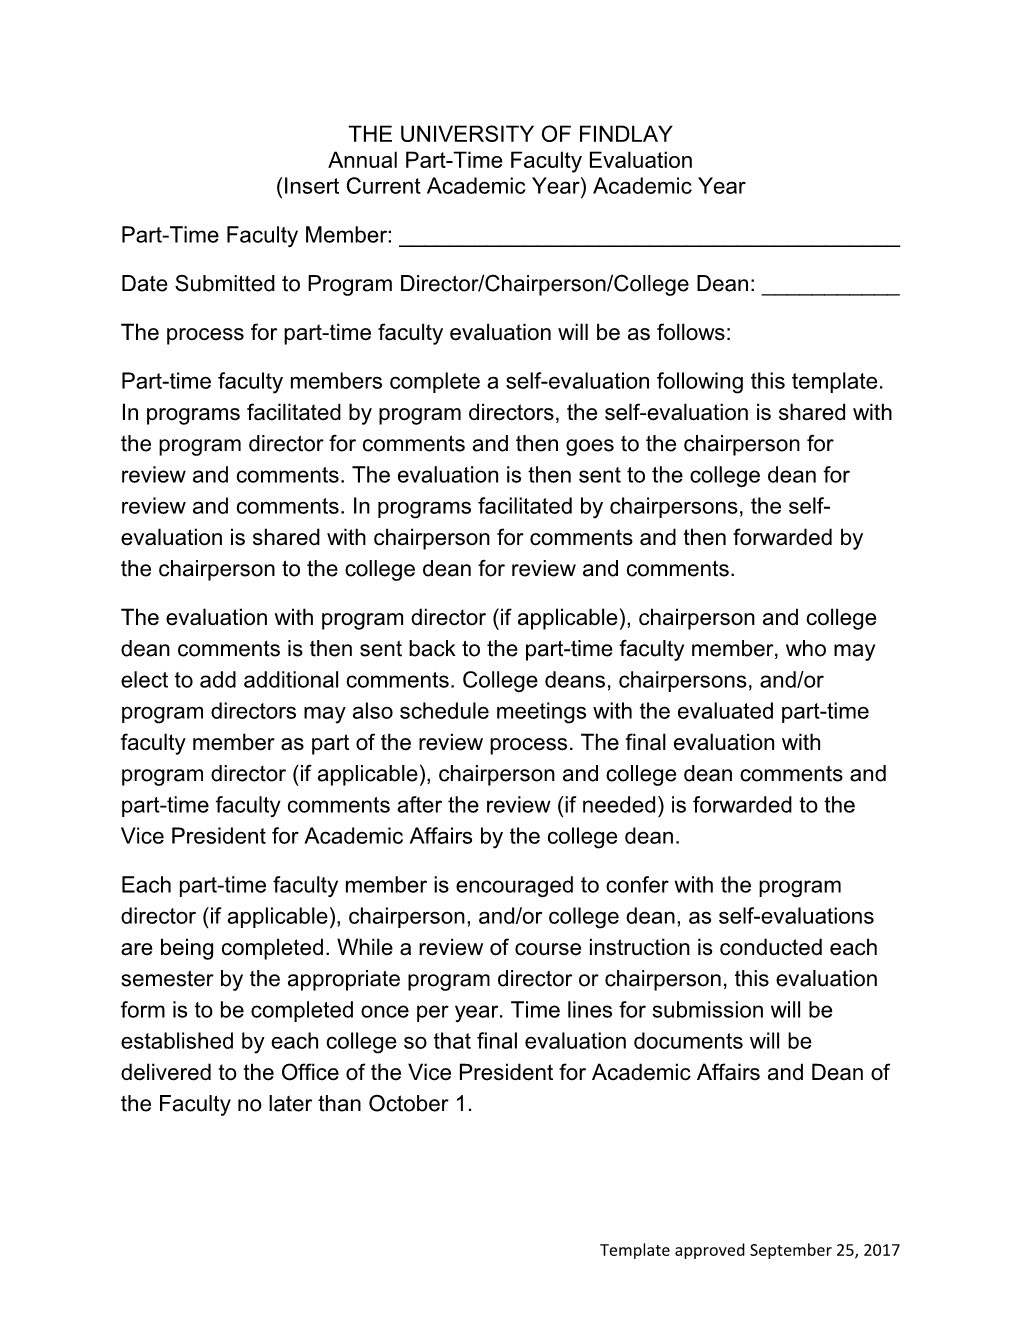 Evaluation Template for Part-Time Faculty